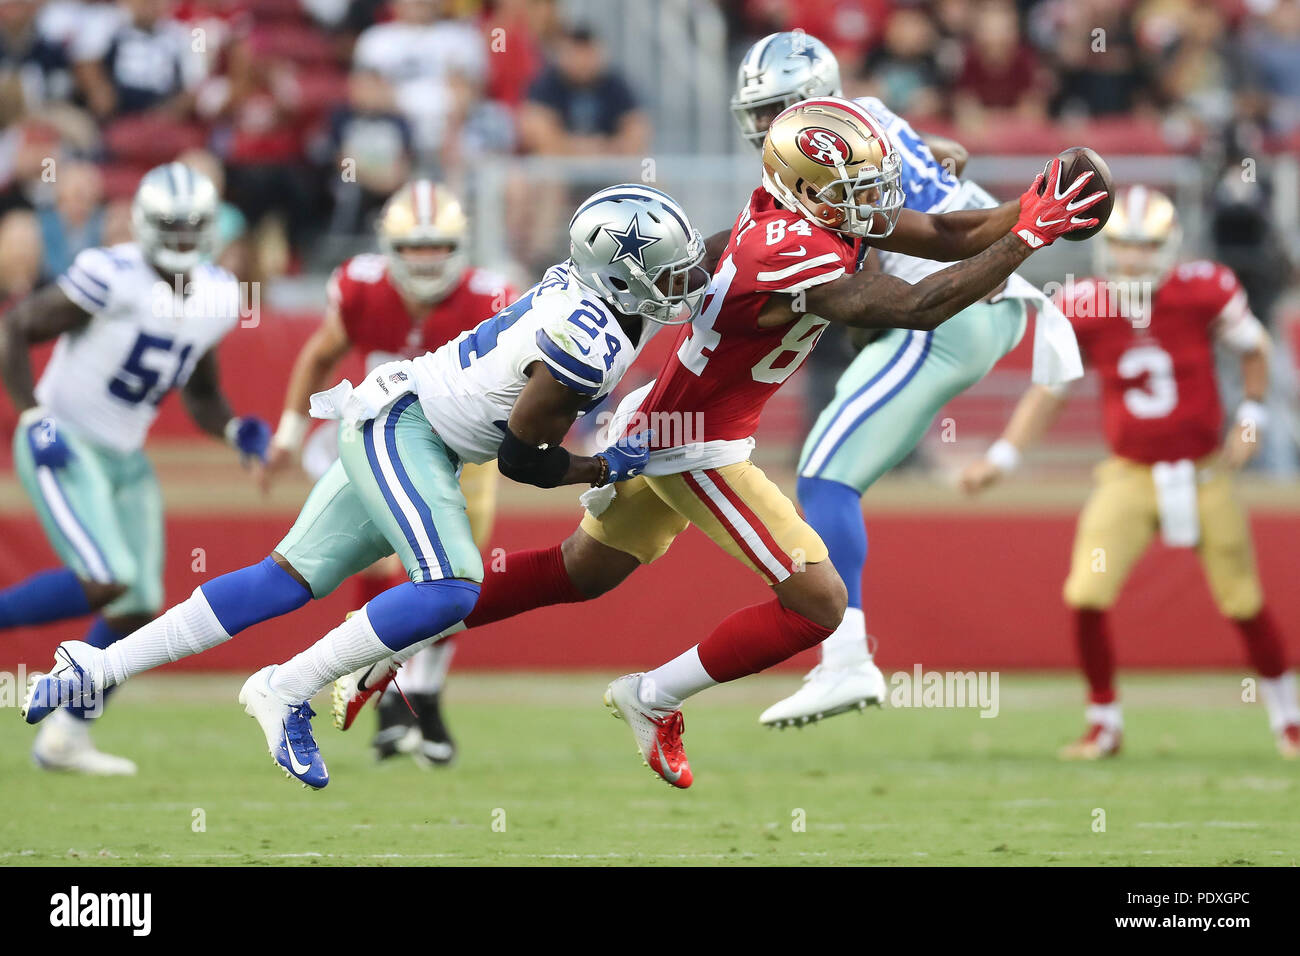 August 8, 2018: San Francisco 49ers wide receiver Kendrick Bourne (84) makes a leaping catch ahead of trailing defender Dallas Cowboys cornerback Chidobe Awuzie (24) in the game between the Dallas Cowboys and San Francisco 49ers, Levi Stadium, San Jose, CA. Photographer: Peter Joneleit Stock Photo